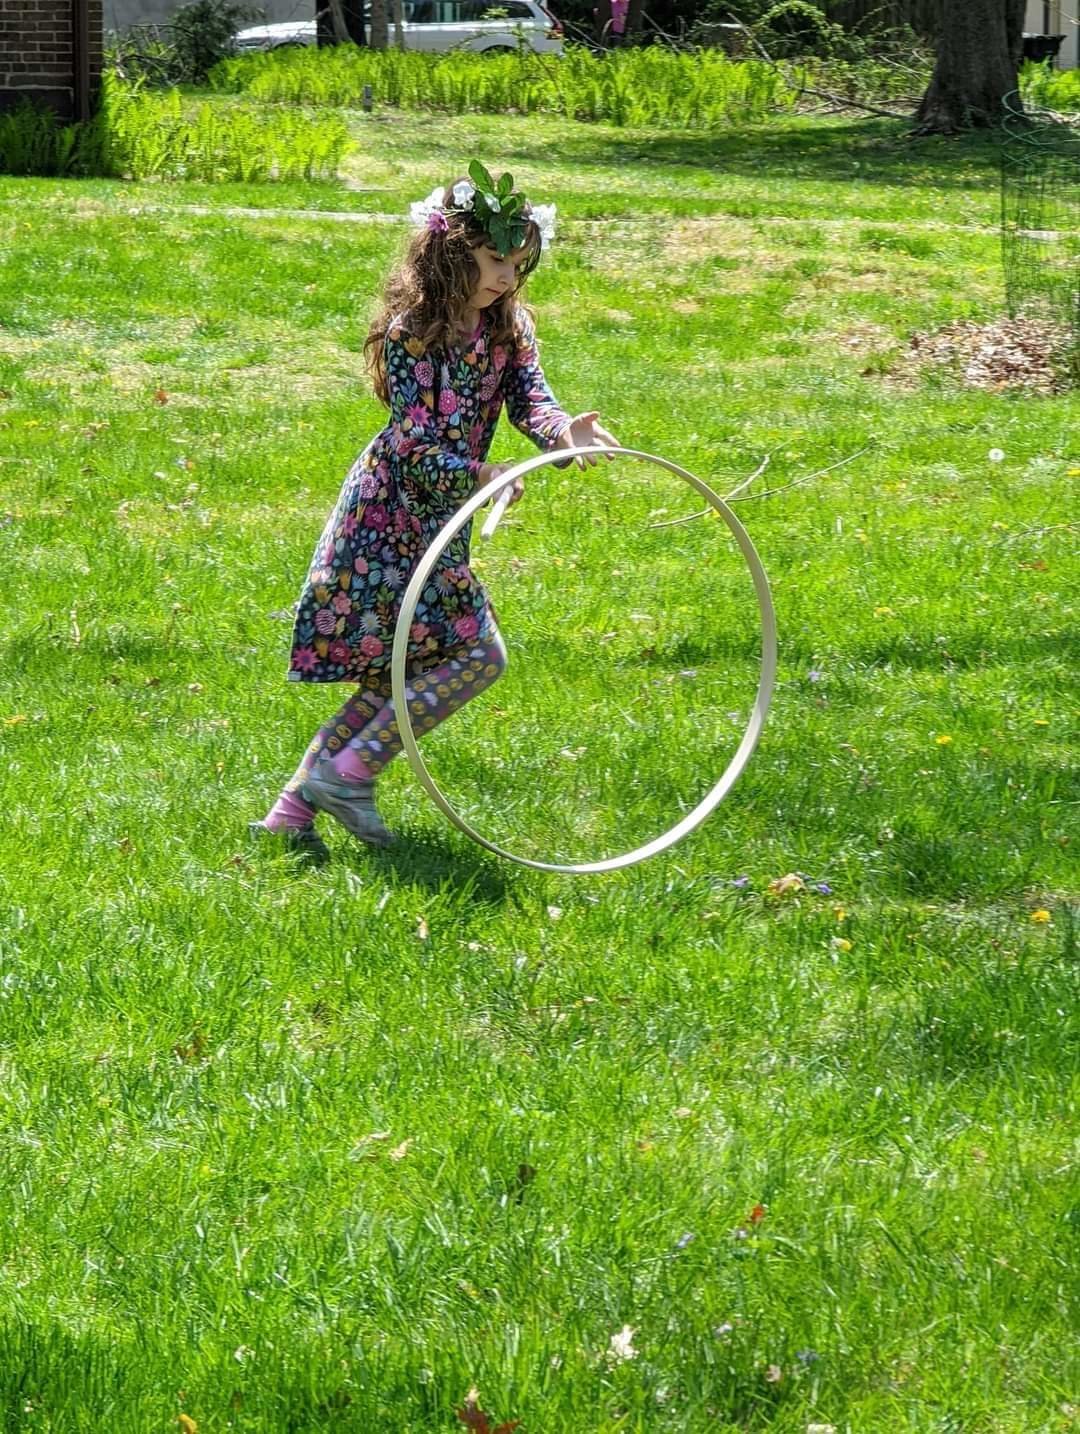 Young Sarah Deans demonstrates how to roll a hoop.